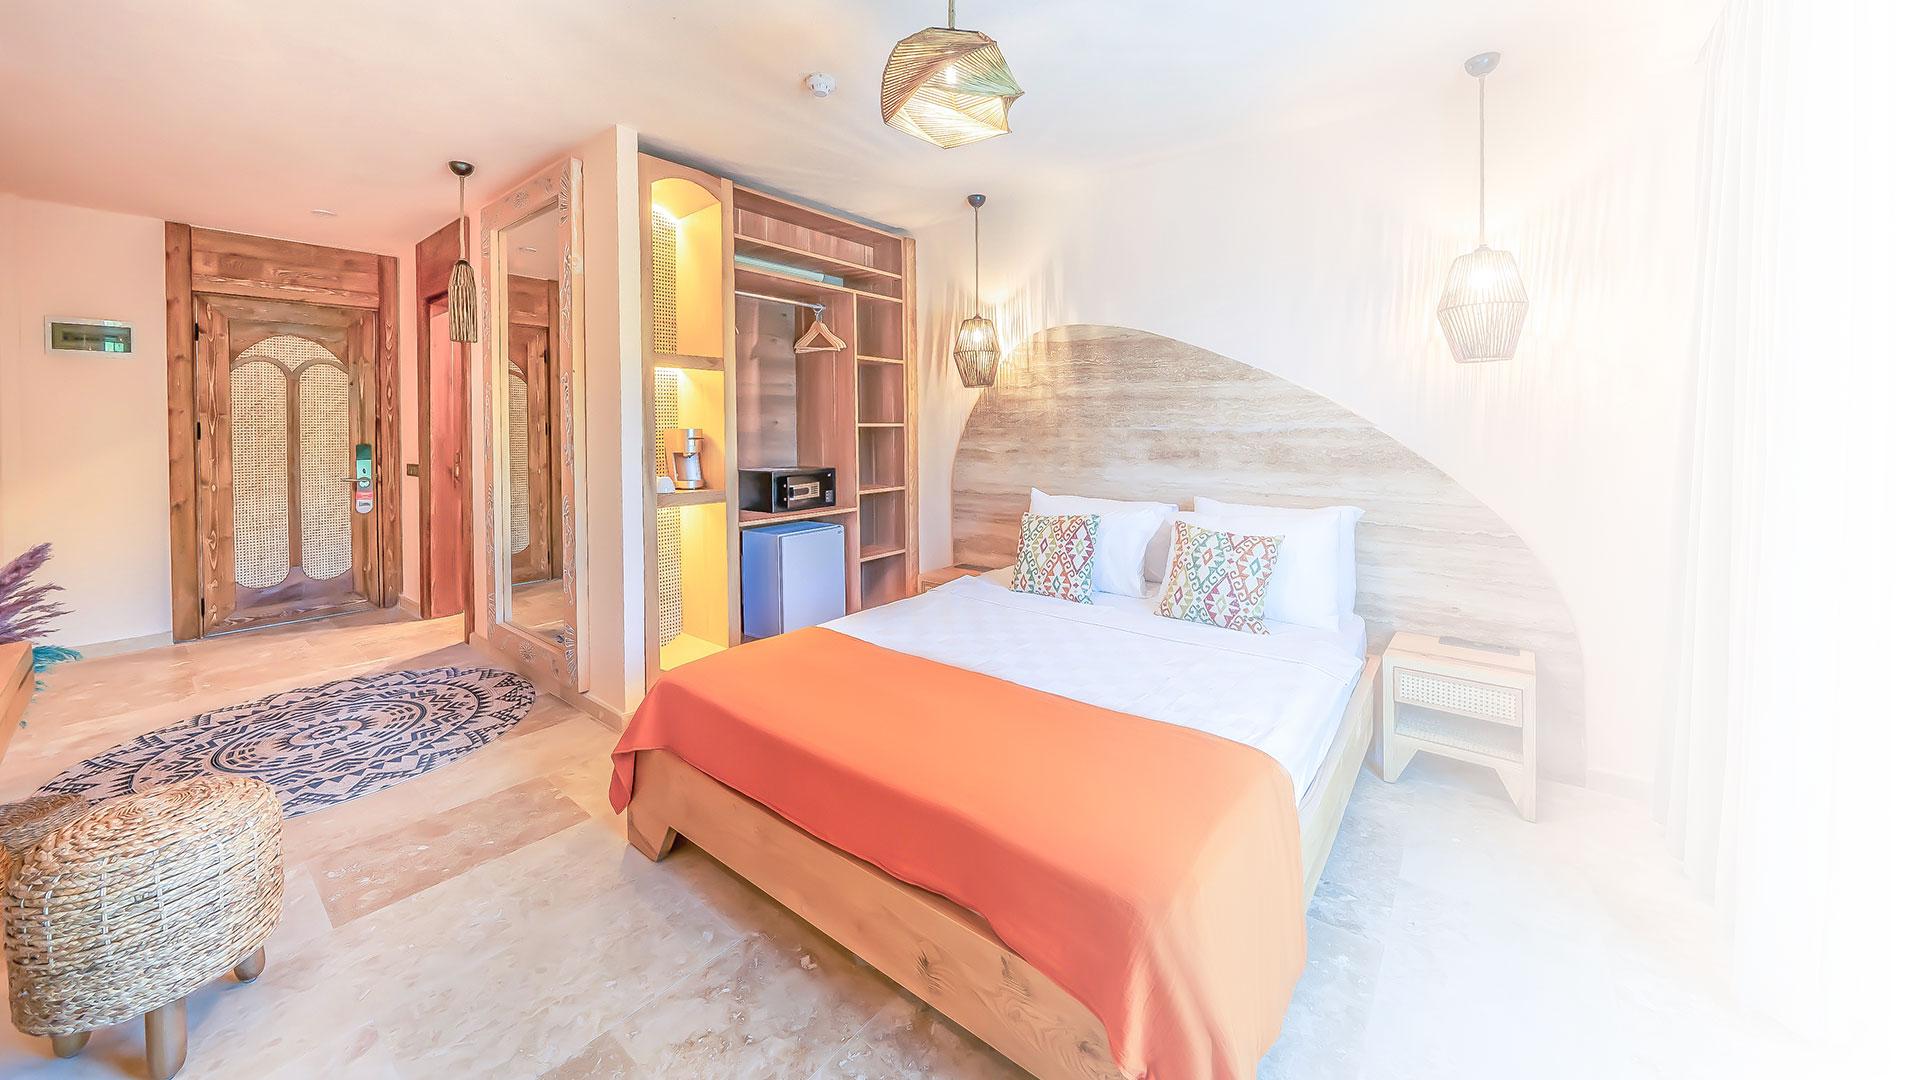 These deluxe rooms with partial sea views offer a spacious accommodation option, featuring a large bed, work desk, armchair, and a balcony to enjoy the fresh breeze.